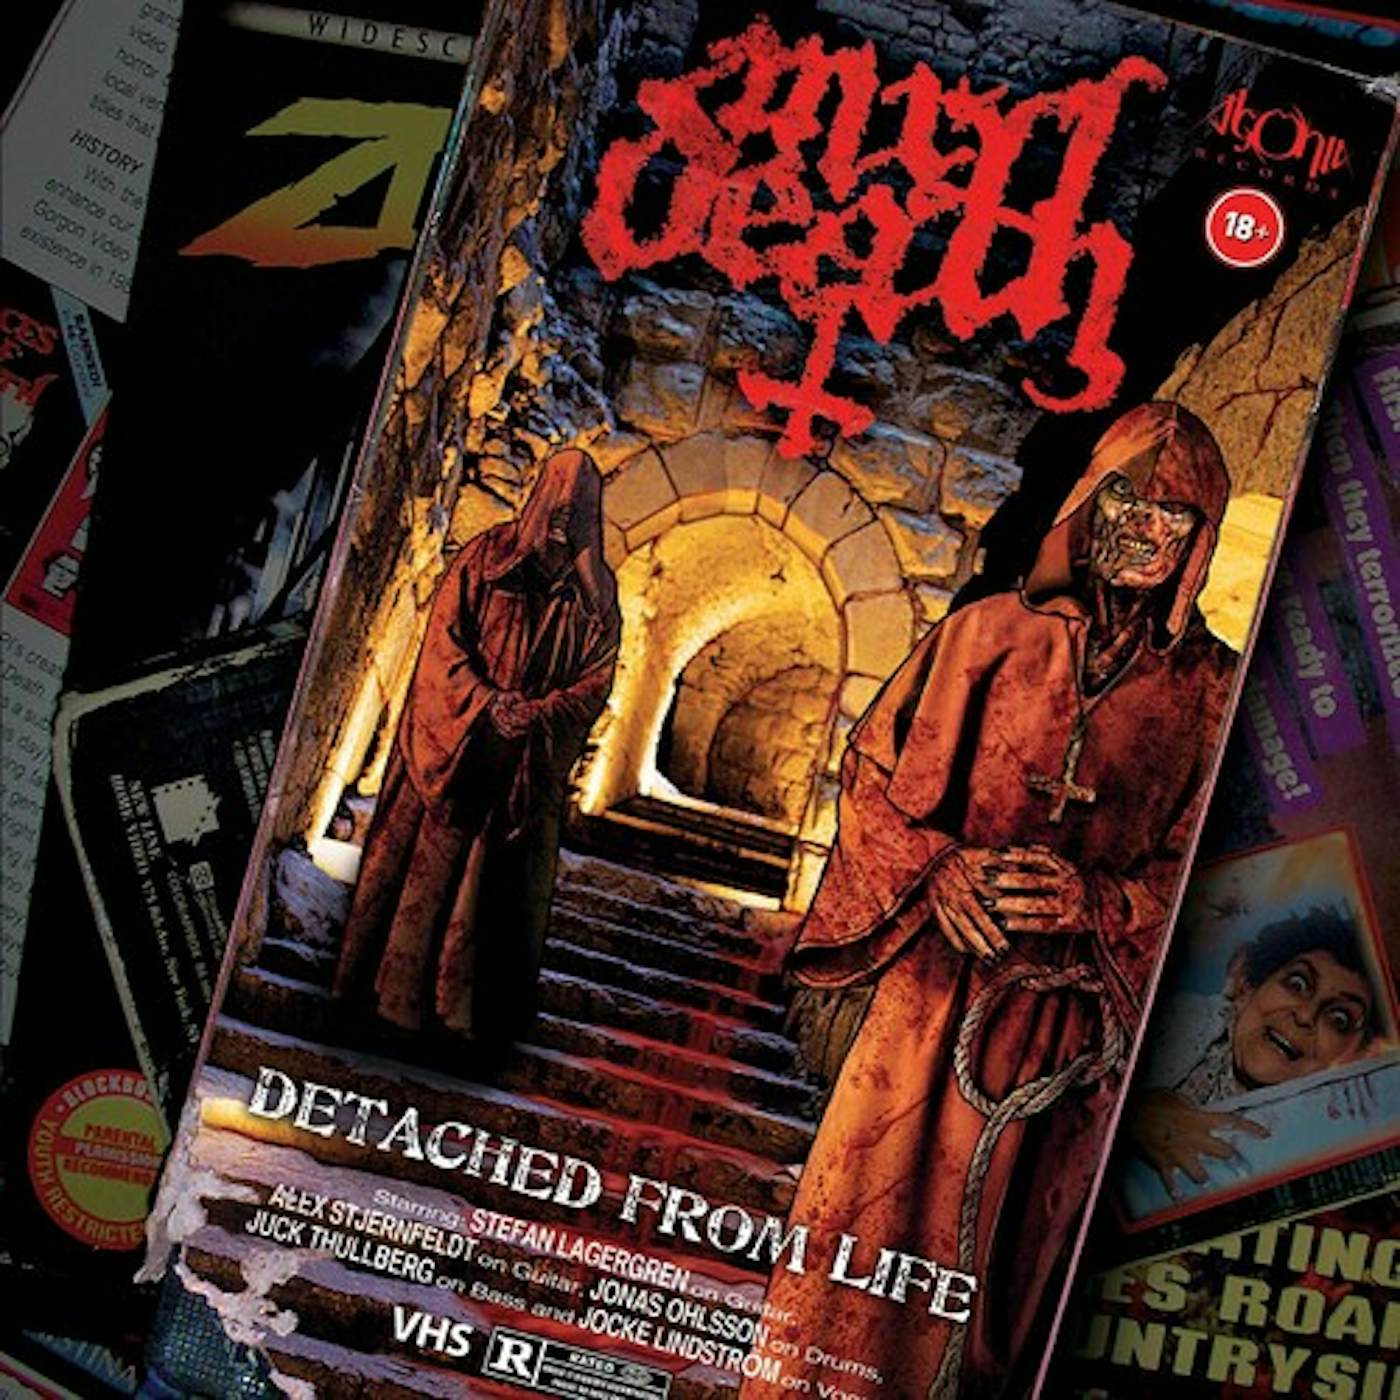 Mr. Death Detached from Life Vinyl Record